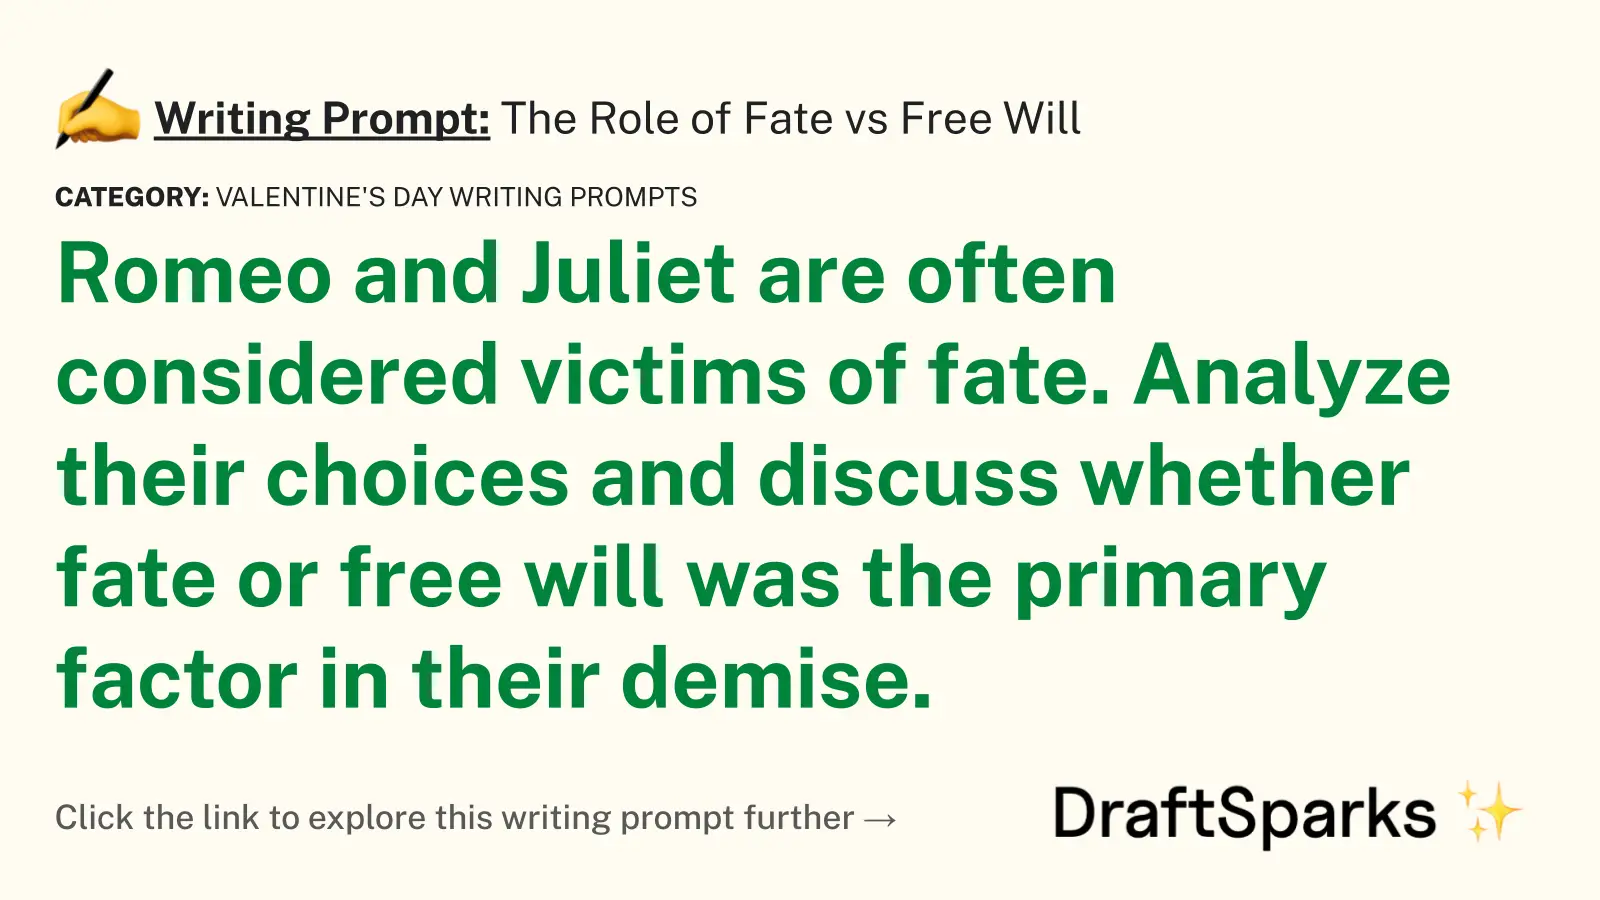 The Role of Fate vs Free Will